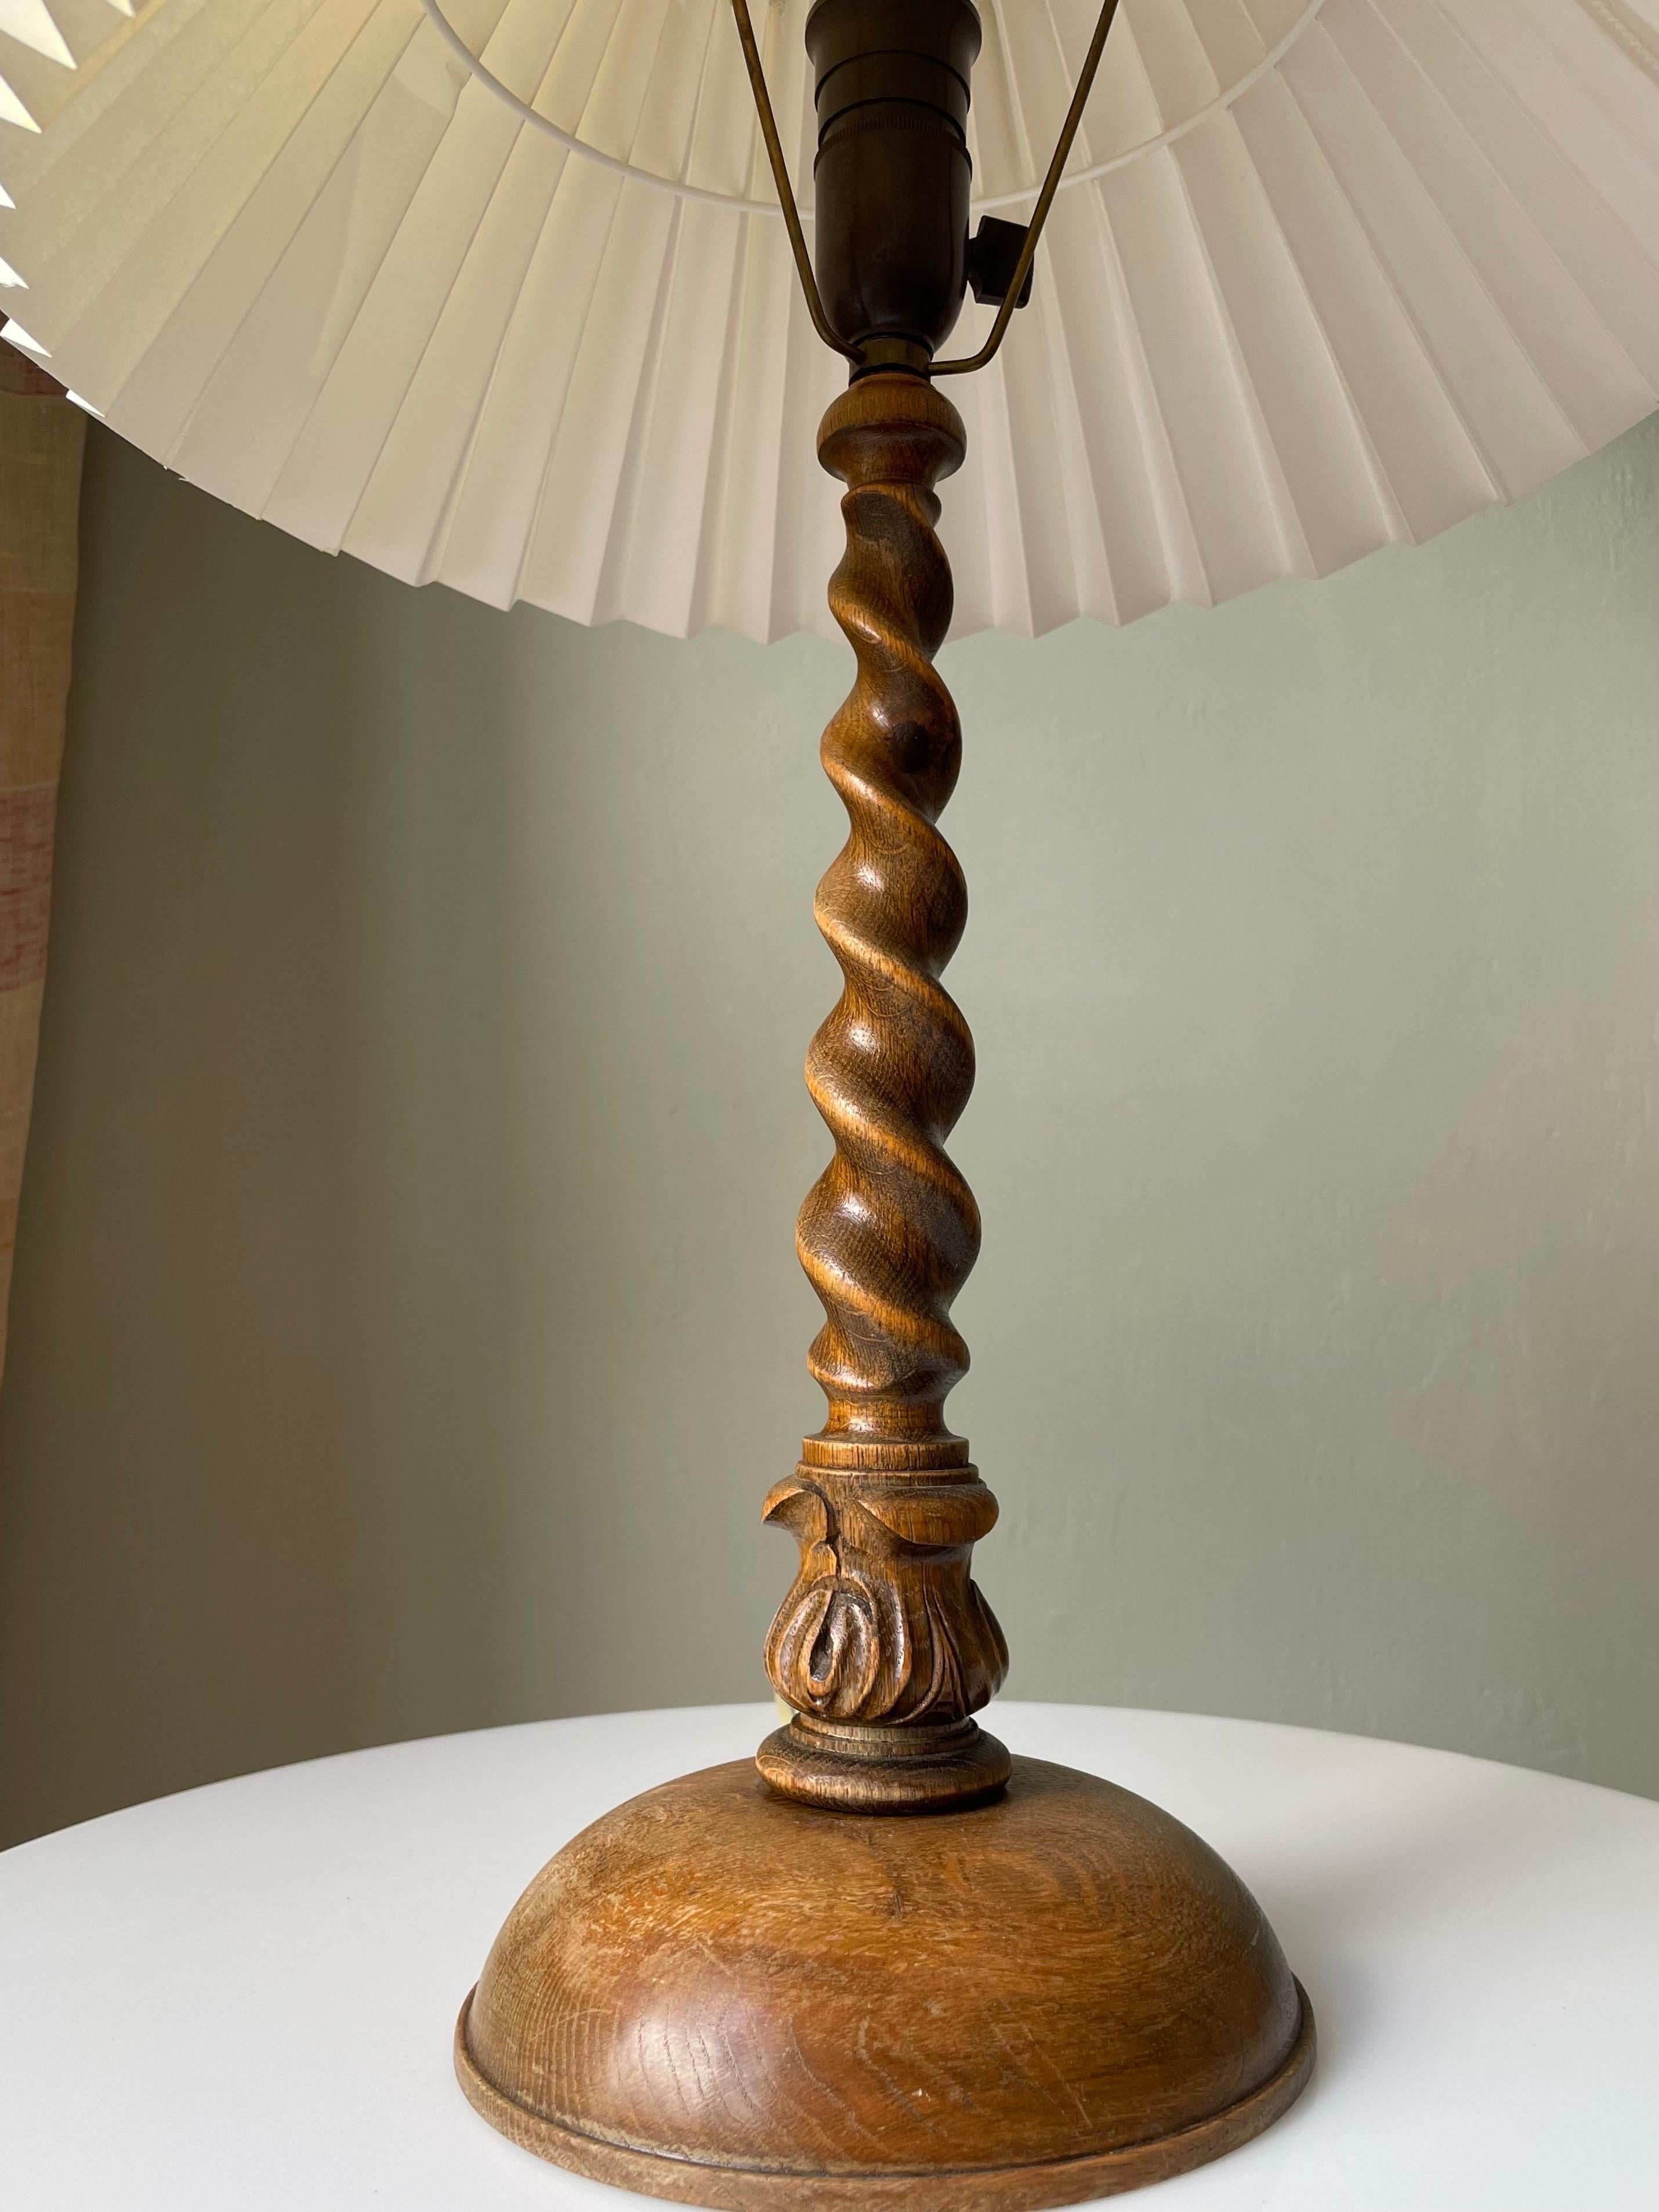 Tall Vintage Swirling Wooden Table Lamp, 1960s For Sale 2